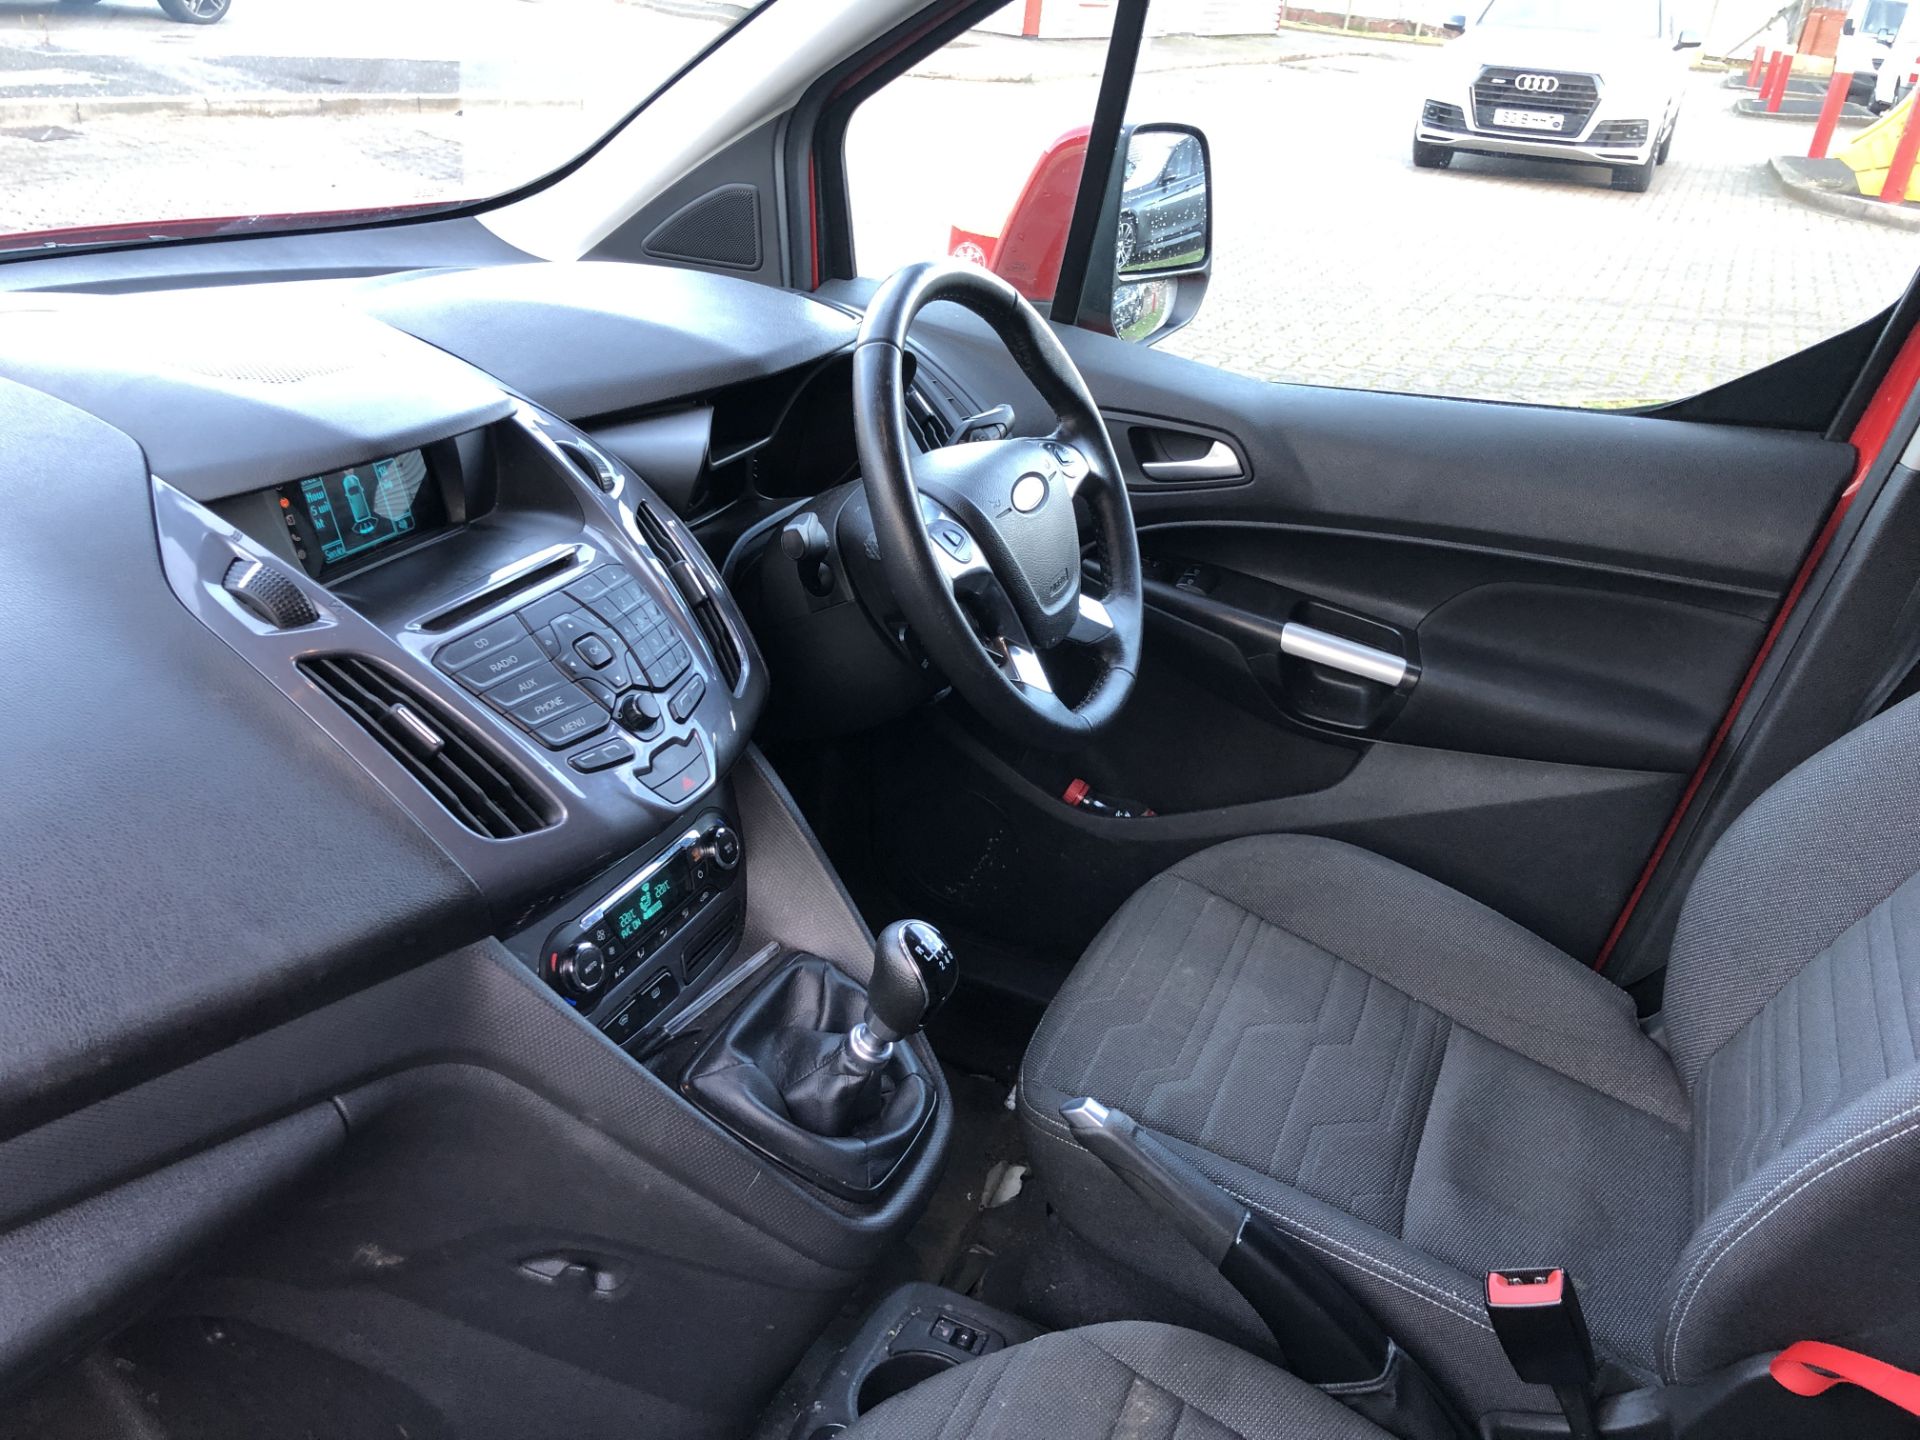 Ford Transit Connect 240 Limited, Red - Image 11 of 18